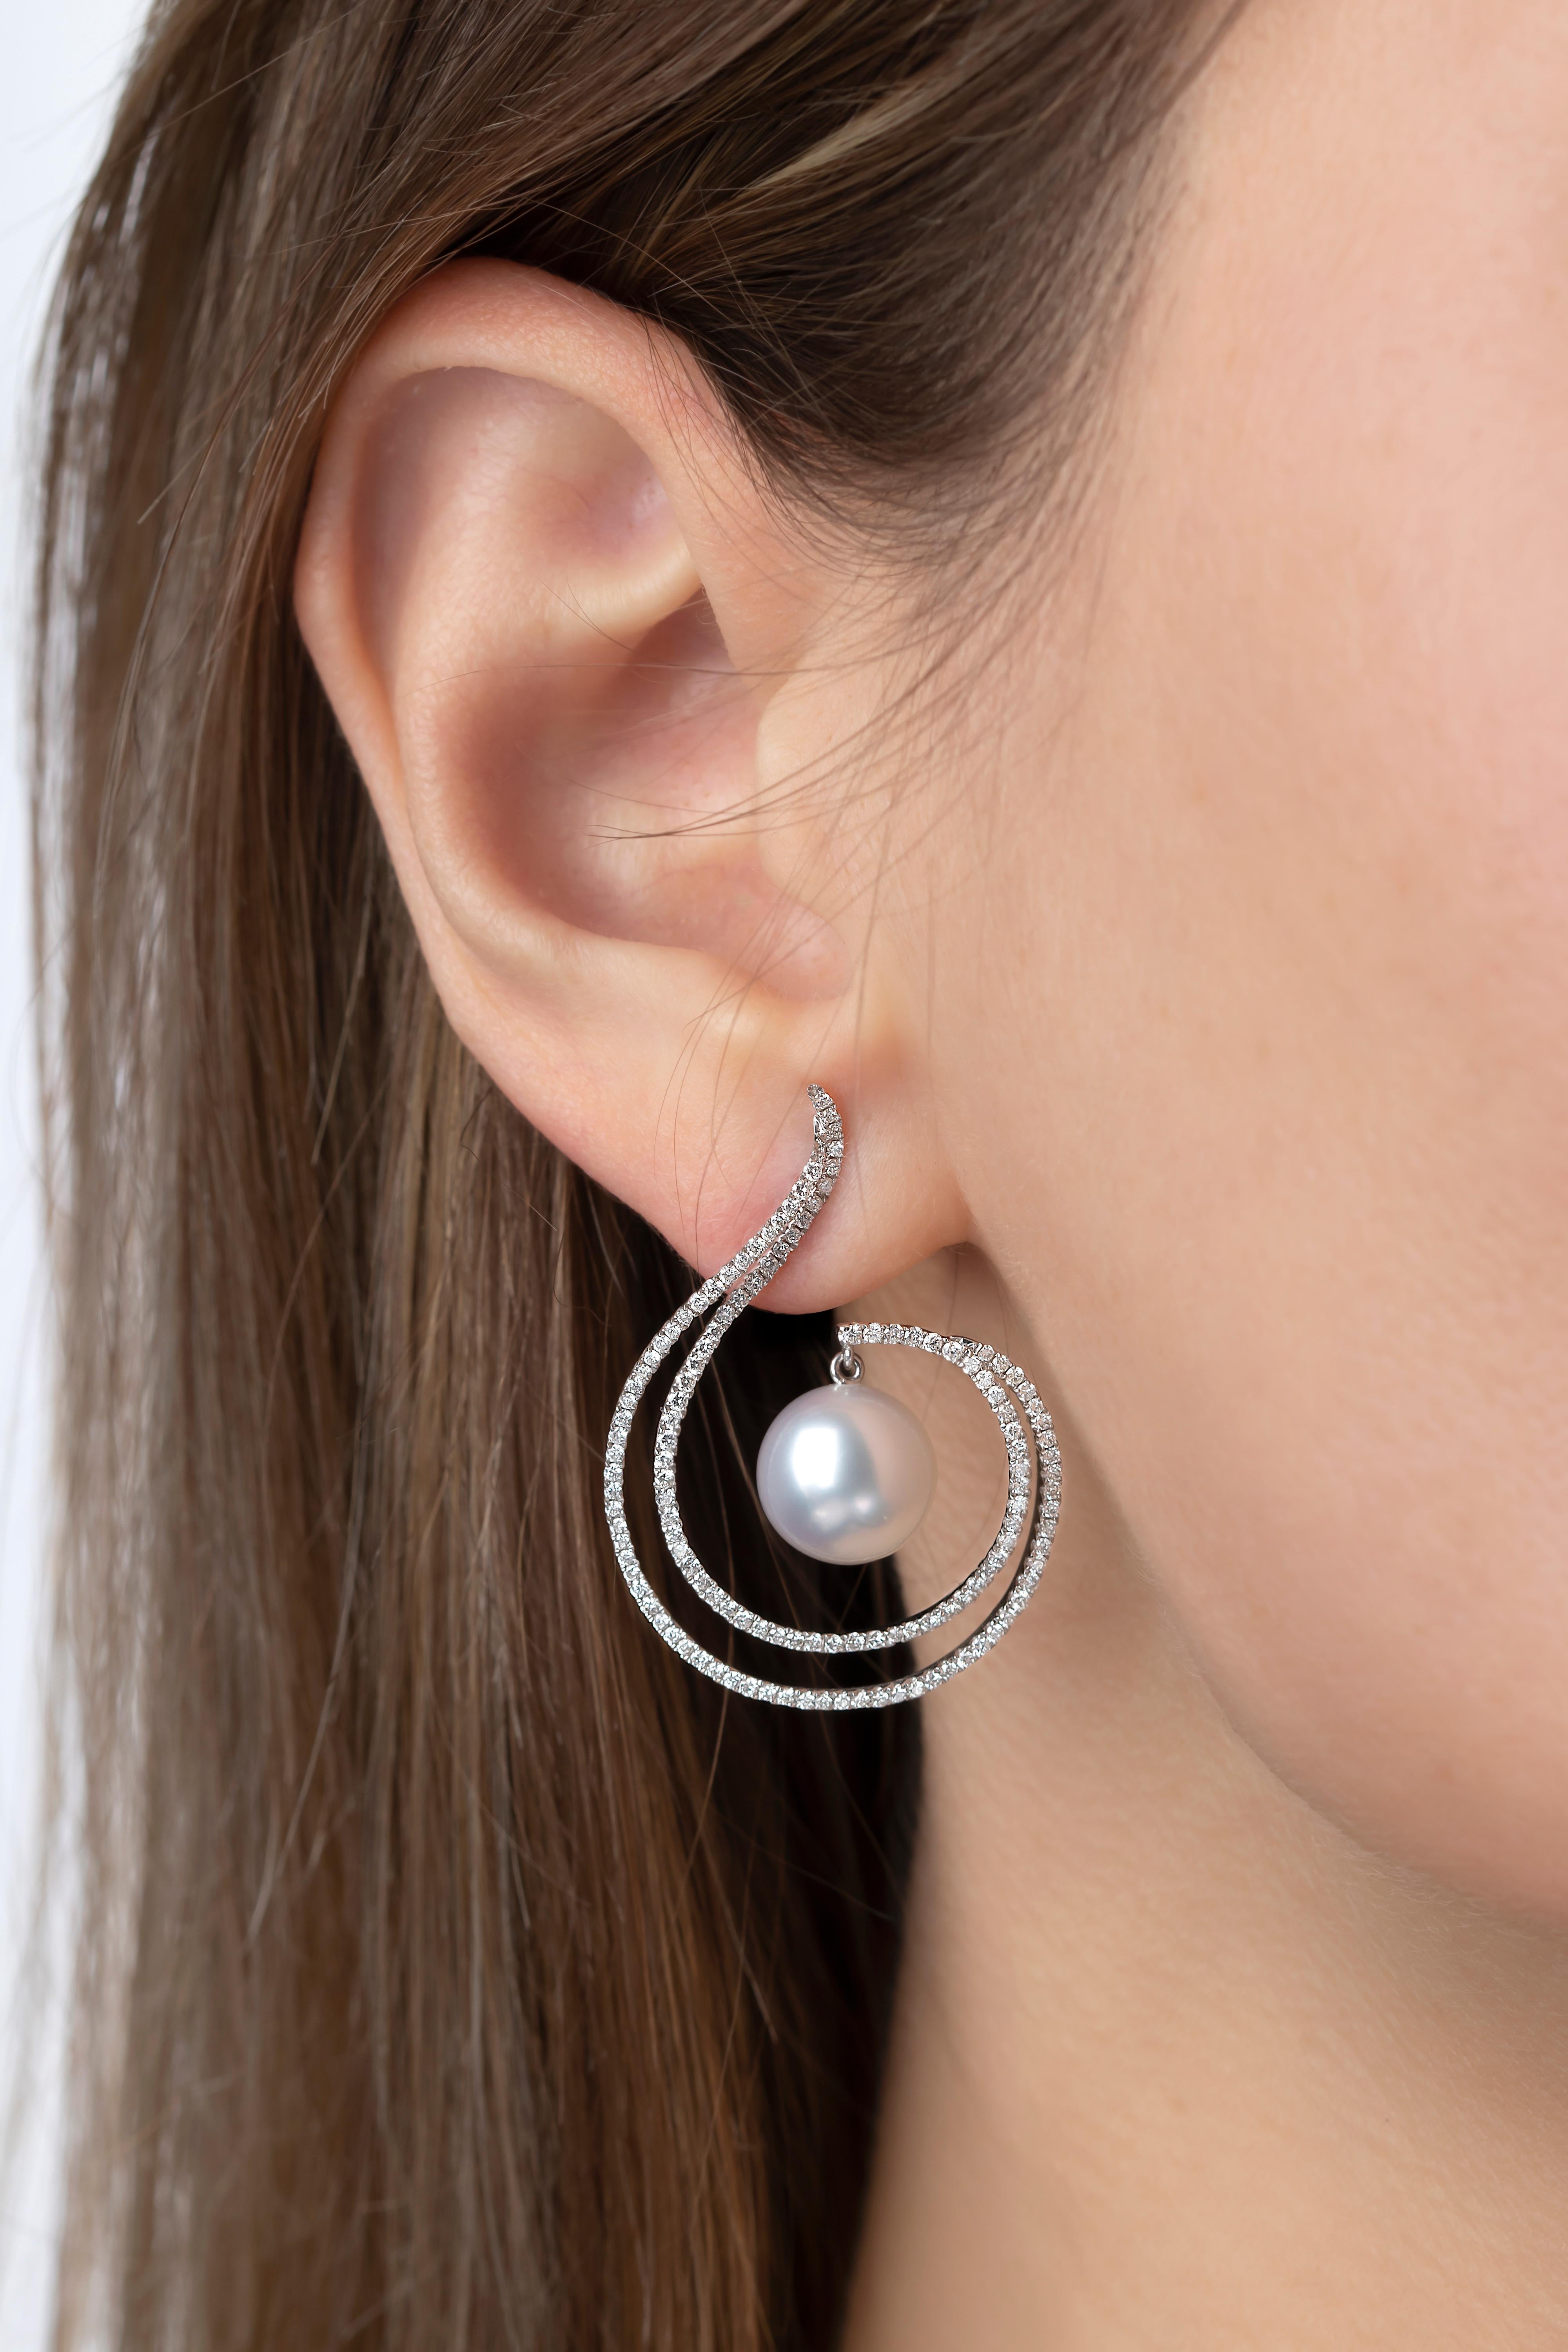 These show-stopping earrings by Yoko London feature a lustrous South Sea pearl set amongst a contemporary swirl of diamonds. The earrings are set in 18 Karat White Gold to heighten the sparkle and lustre of this winning combination of South Sea